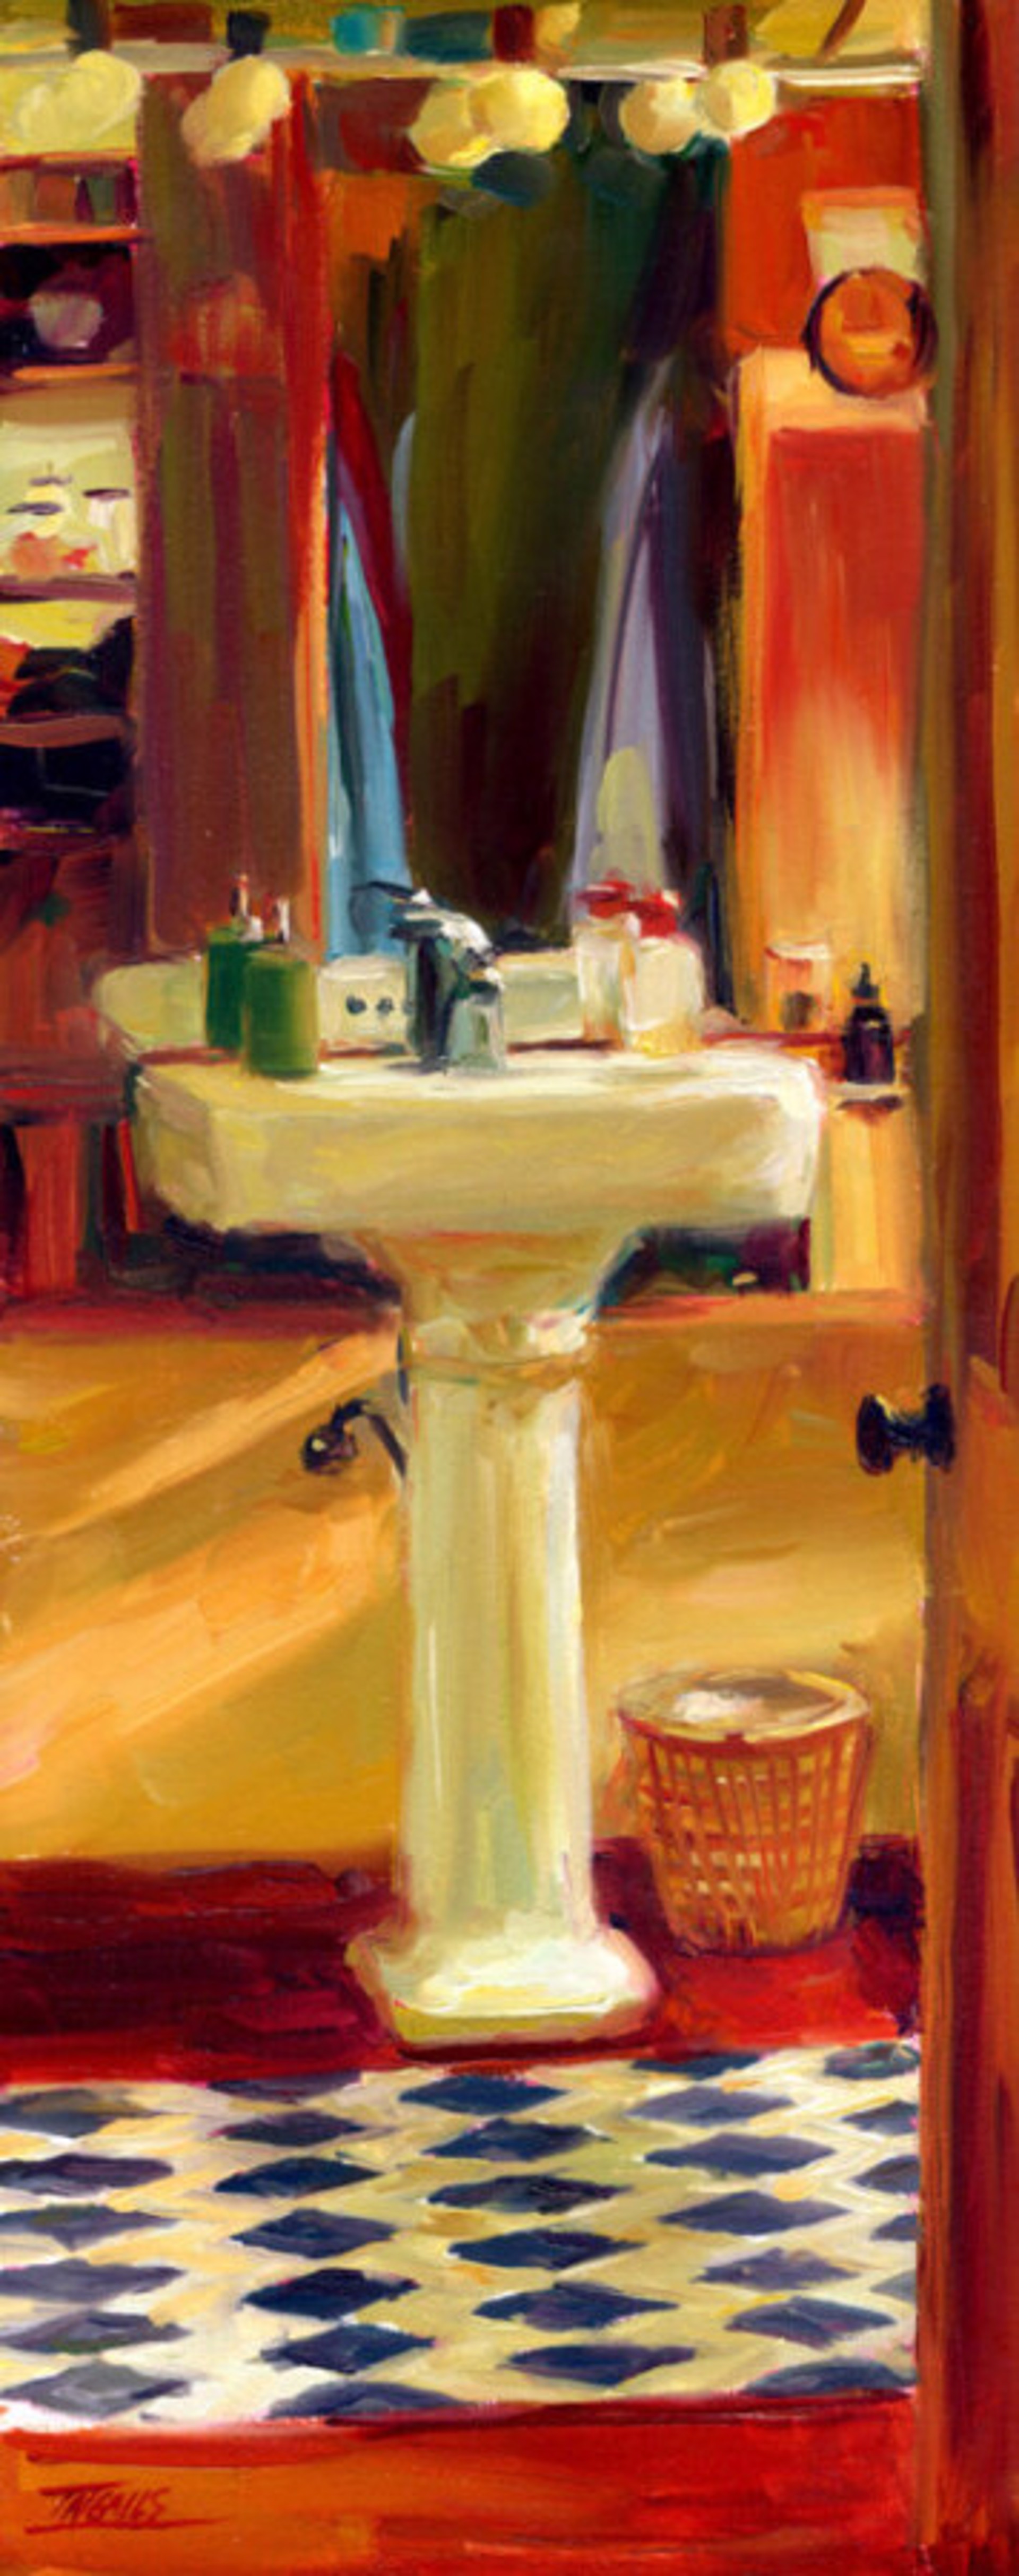 Tami’s Sink by Pam Ingalls